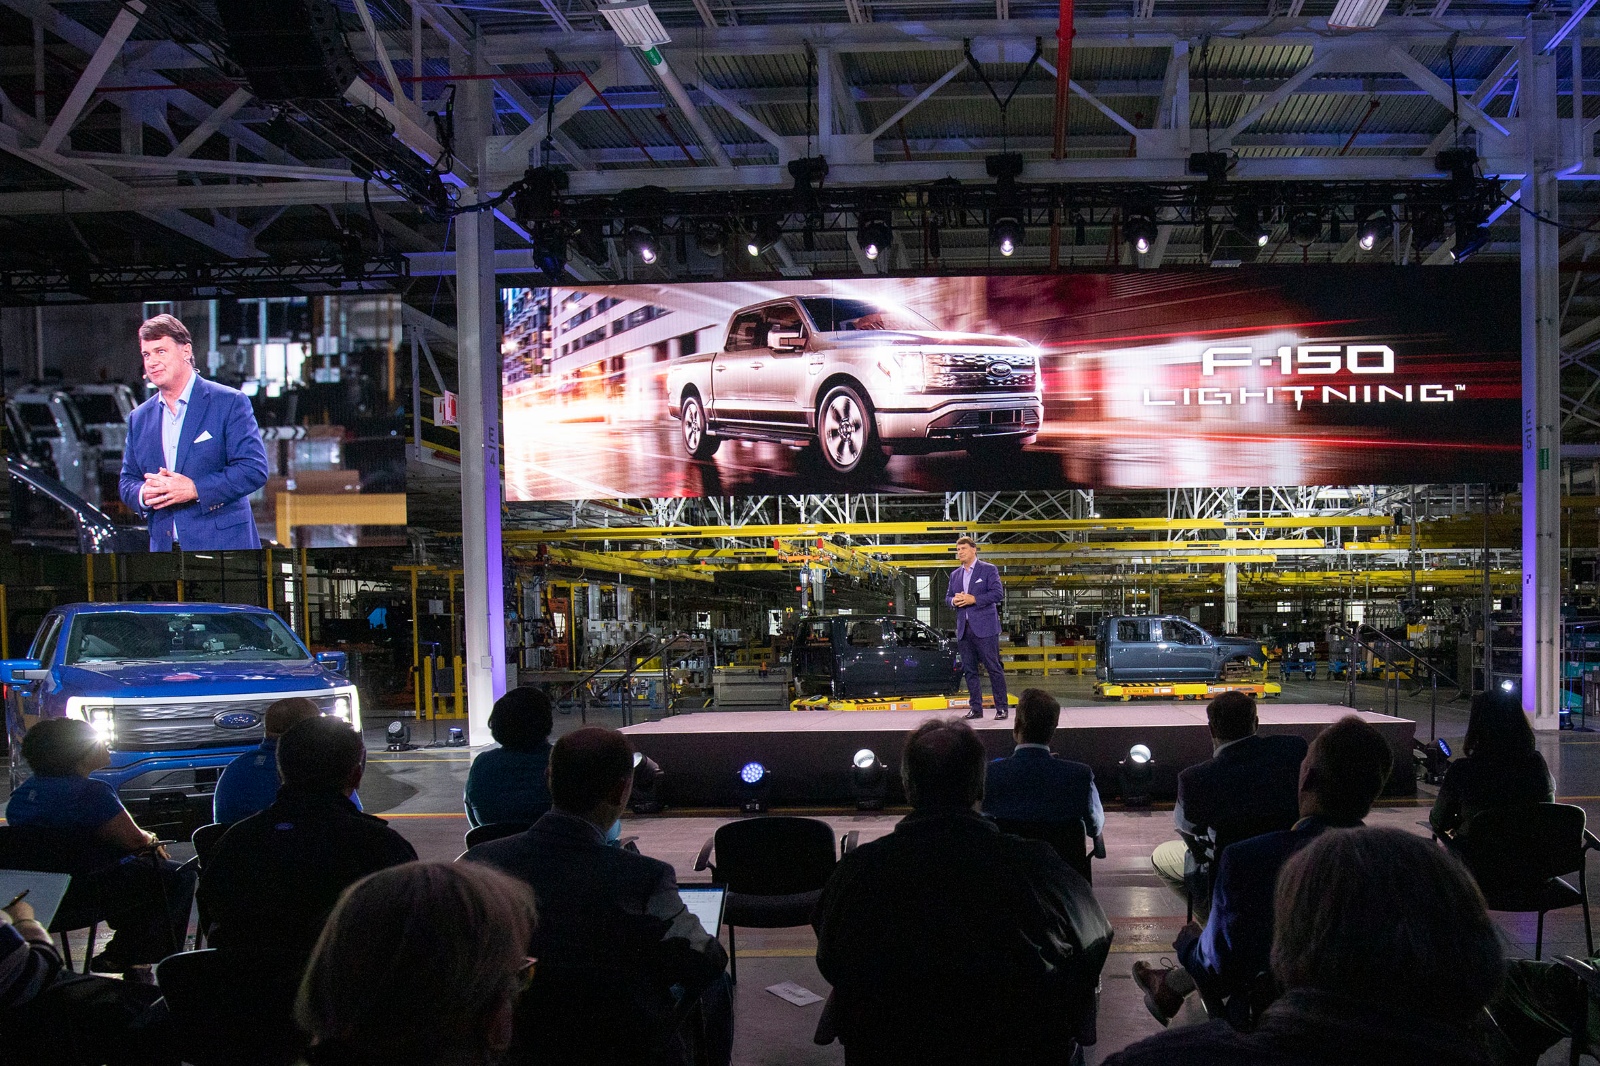 A man in a blue suit stands onstage, next to a Ford pick-up truck, as an audience watches.